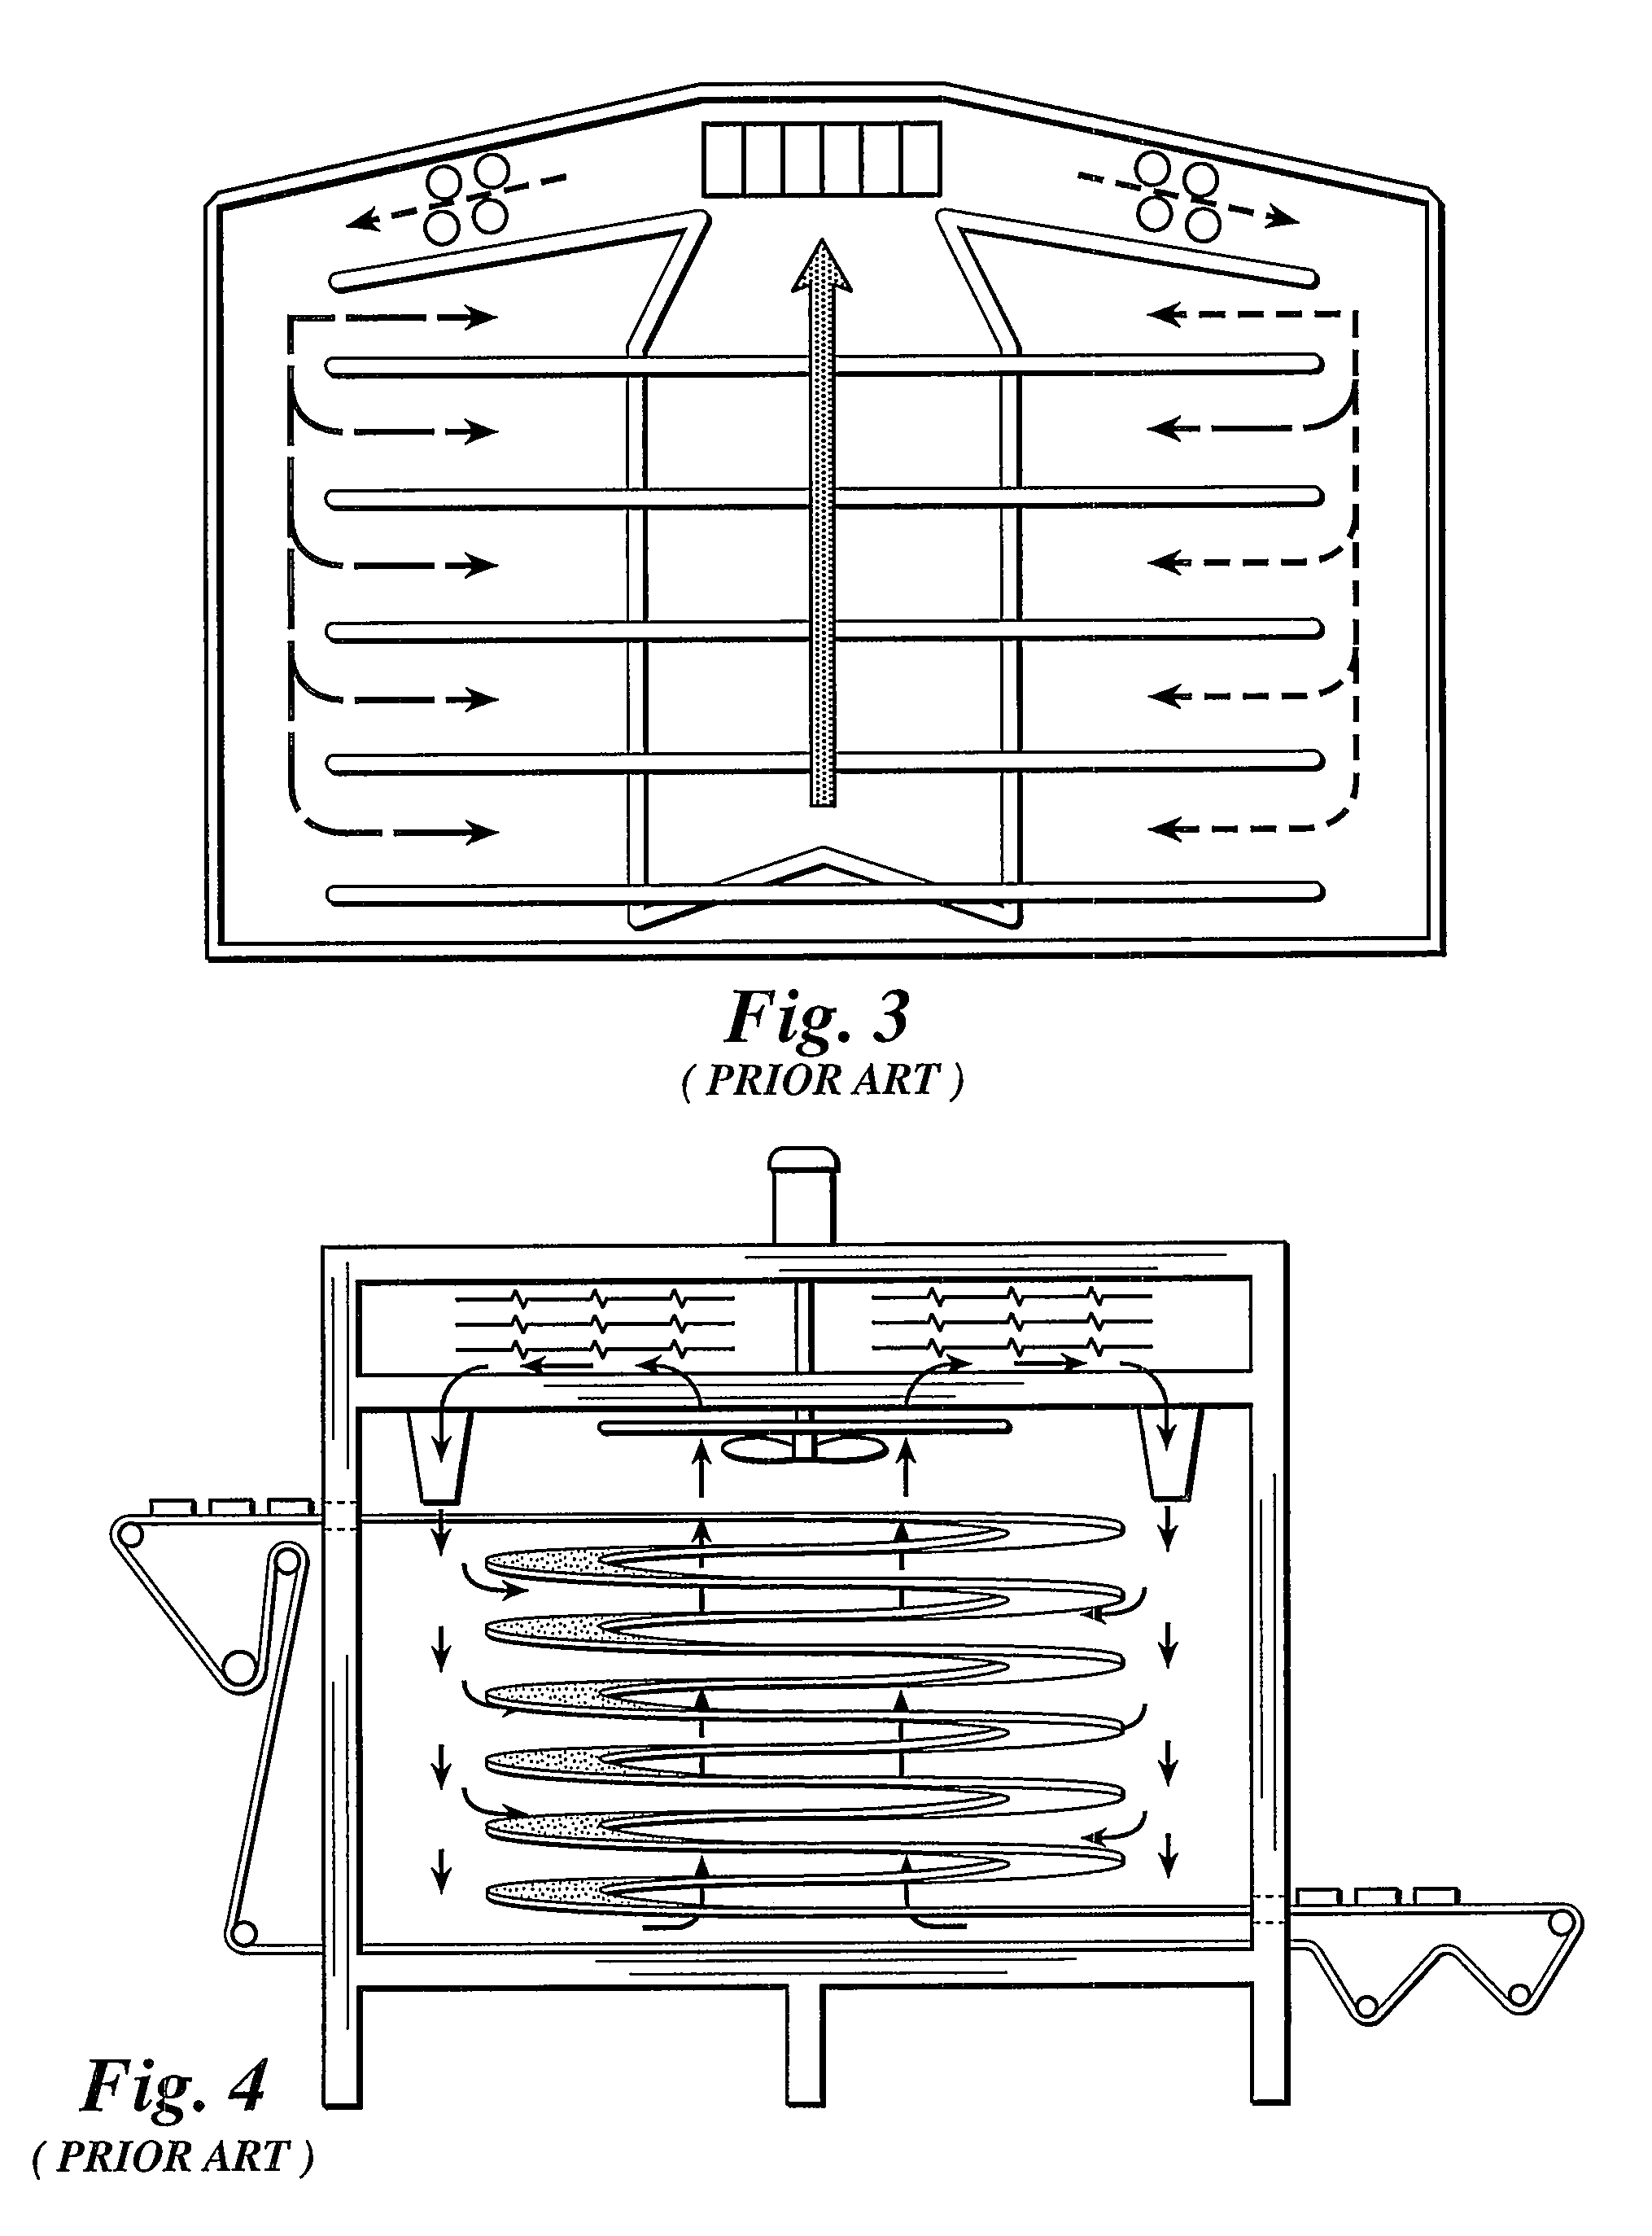 Airflow pattern for spiral ovens